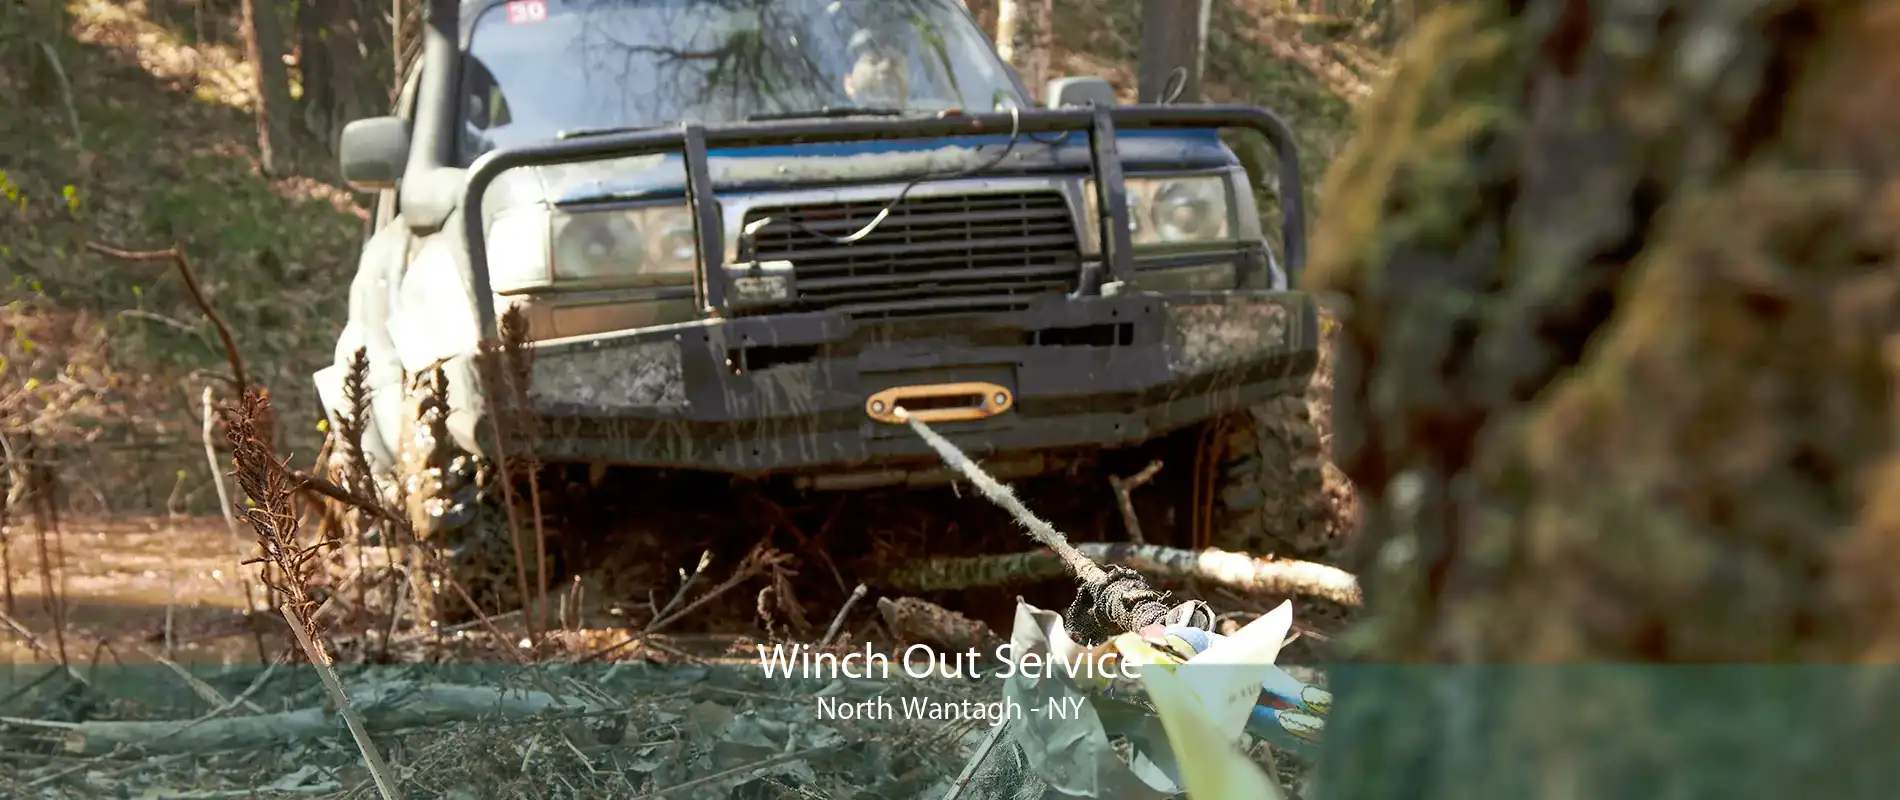 Winch Out Service North Wantagh - NY